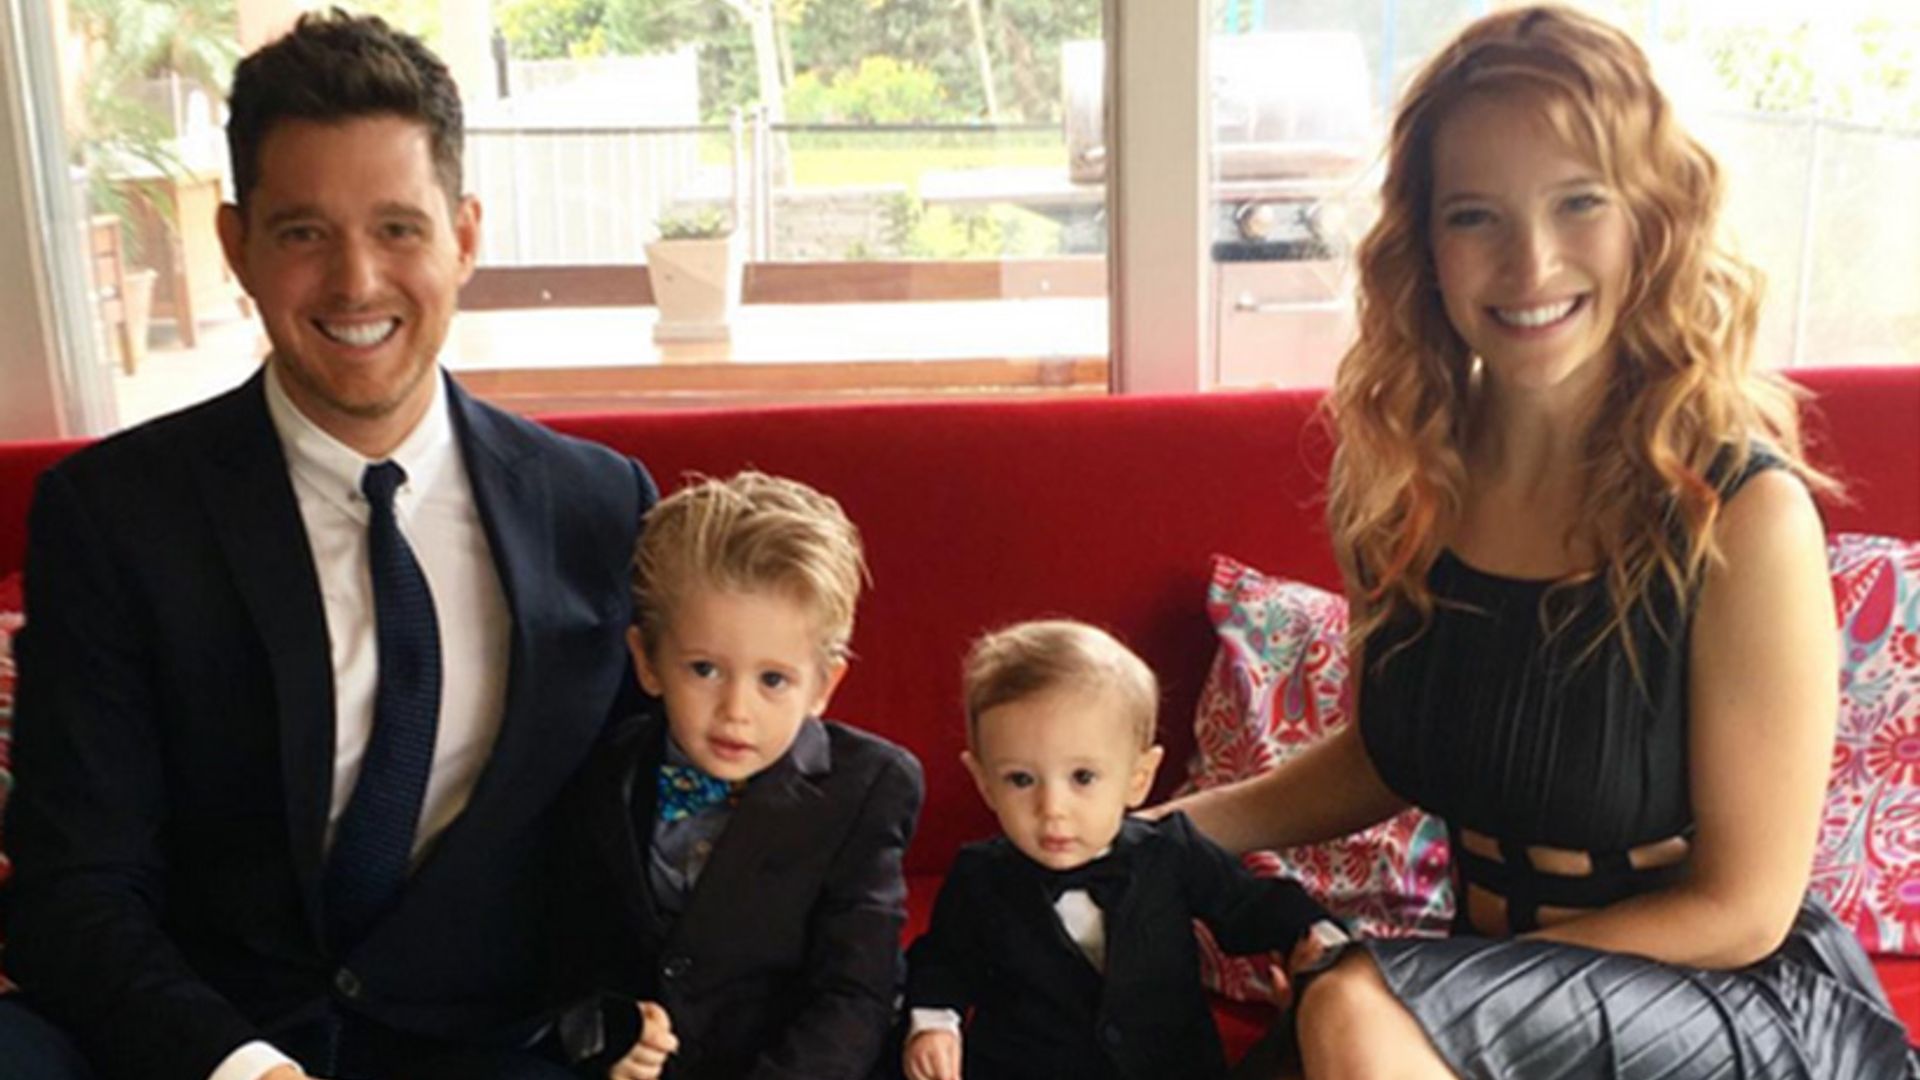 Michael Bublé confirms his three-year-old son Noah has cancer